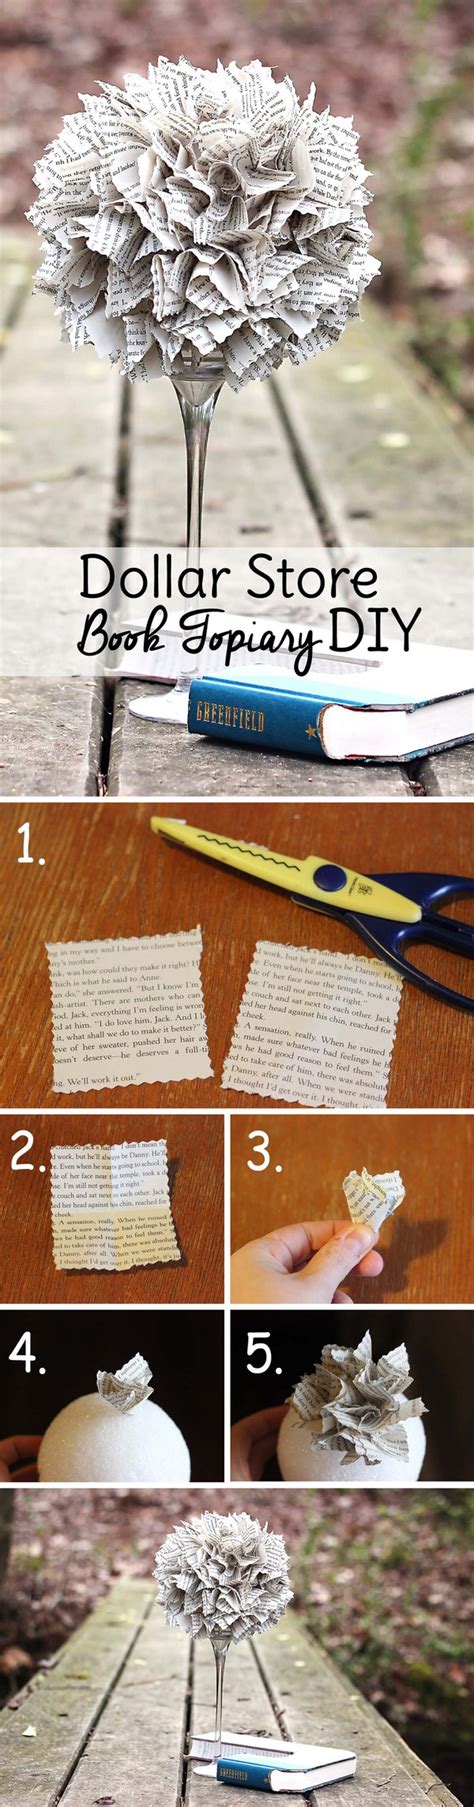 22 Outstanding Diy Craft Ideas To Make With Old Books